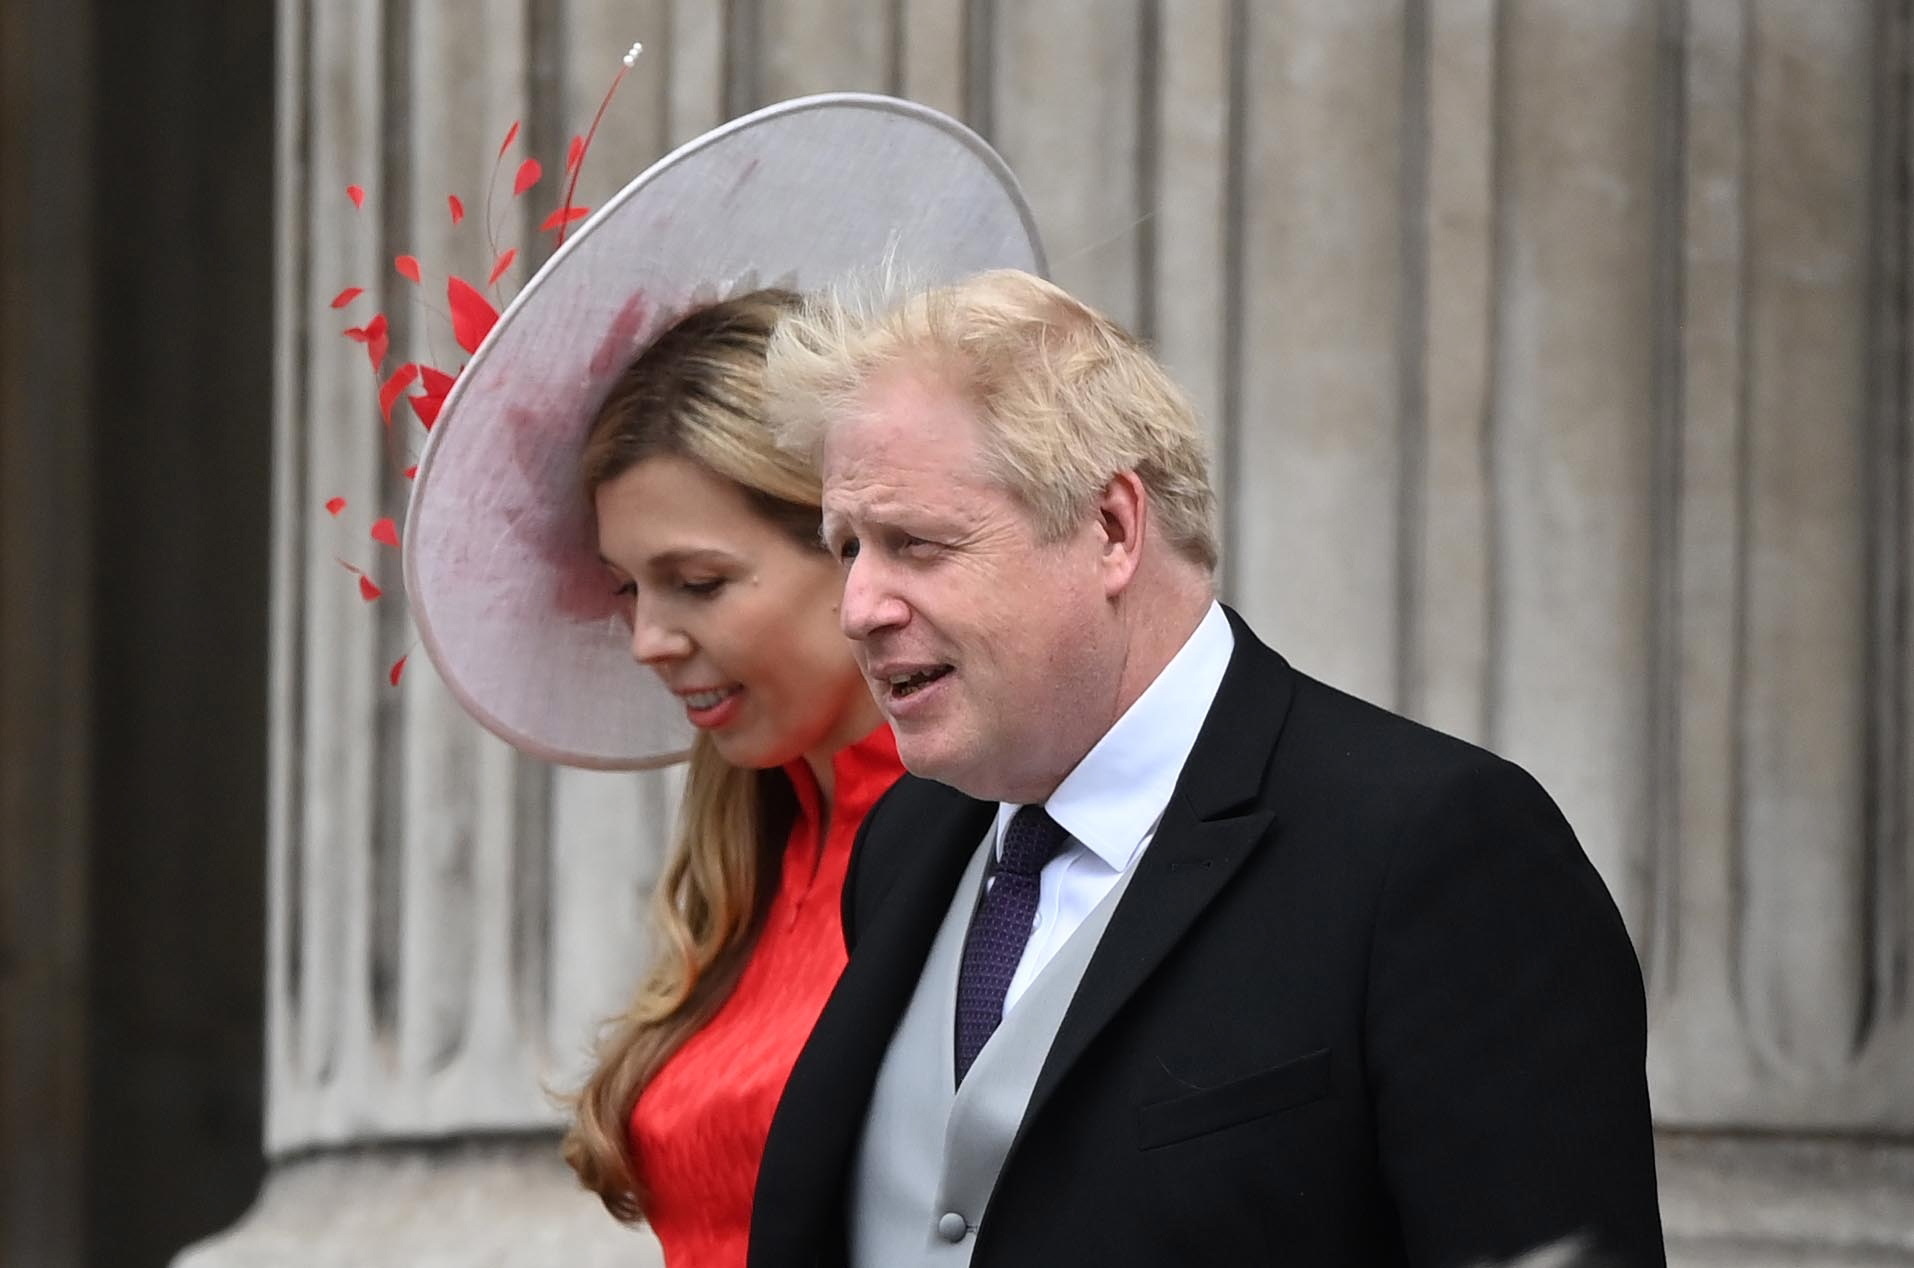 Boris Johnson and his wife, Carrie, were lynched at St. Paul's Cathedral.